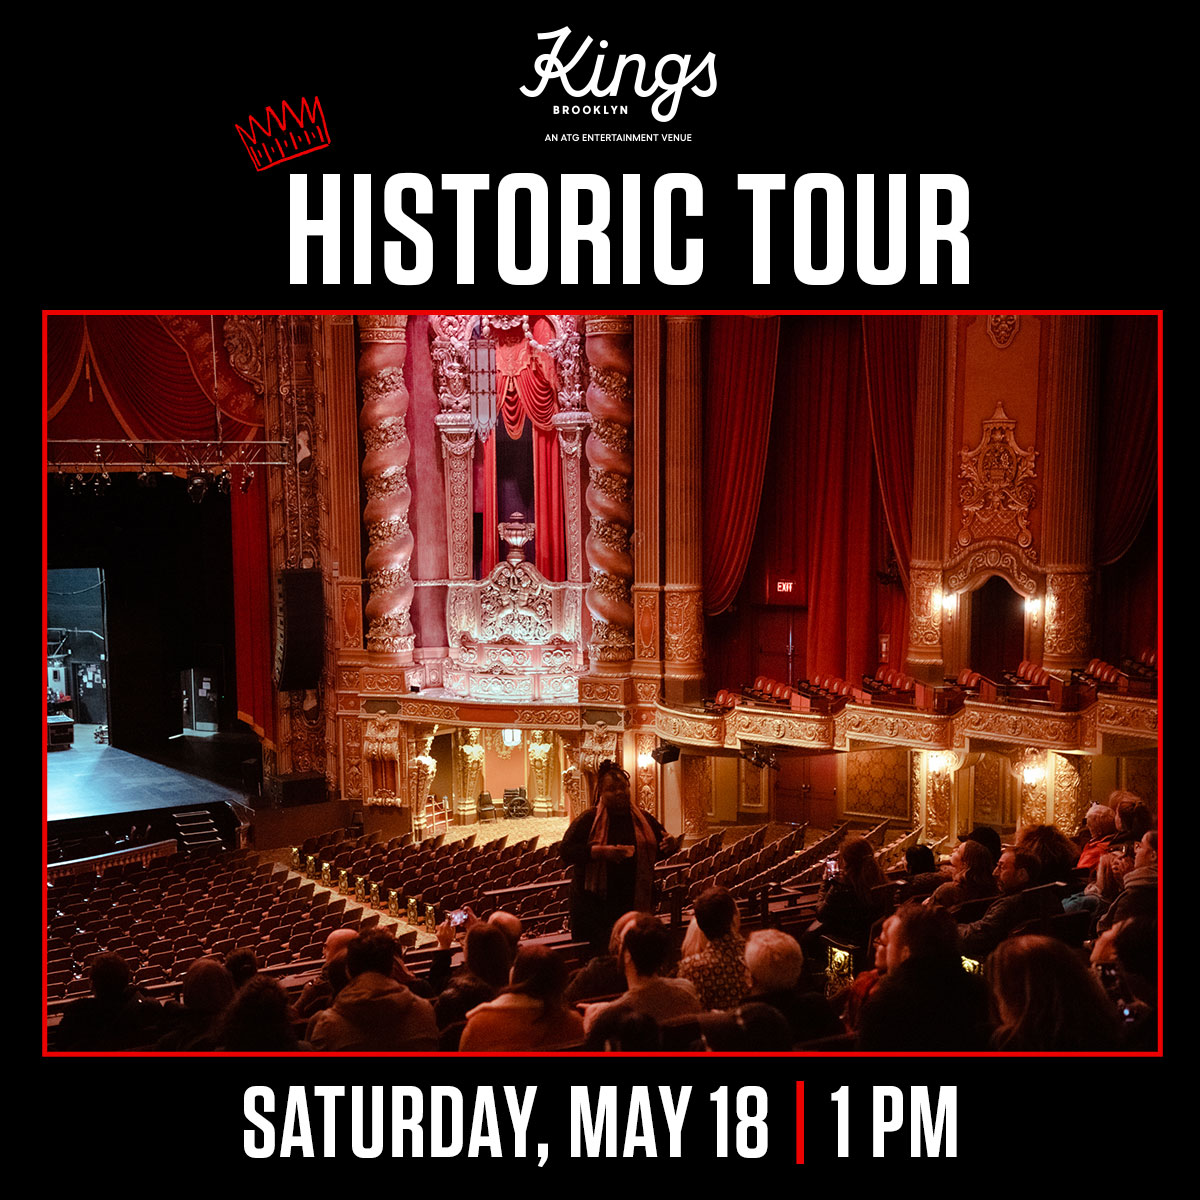 Looking for some weekend plans? Explore Kings Theatre on a historic tour this Saturday! 👑 Step back in time and discover our origins, insights on our stunning architecture, and how we came to be the venue you know today. Grab a ticket and join us at kingstheatre.com/events/kings-t…